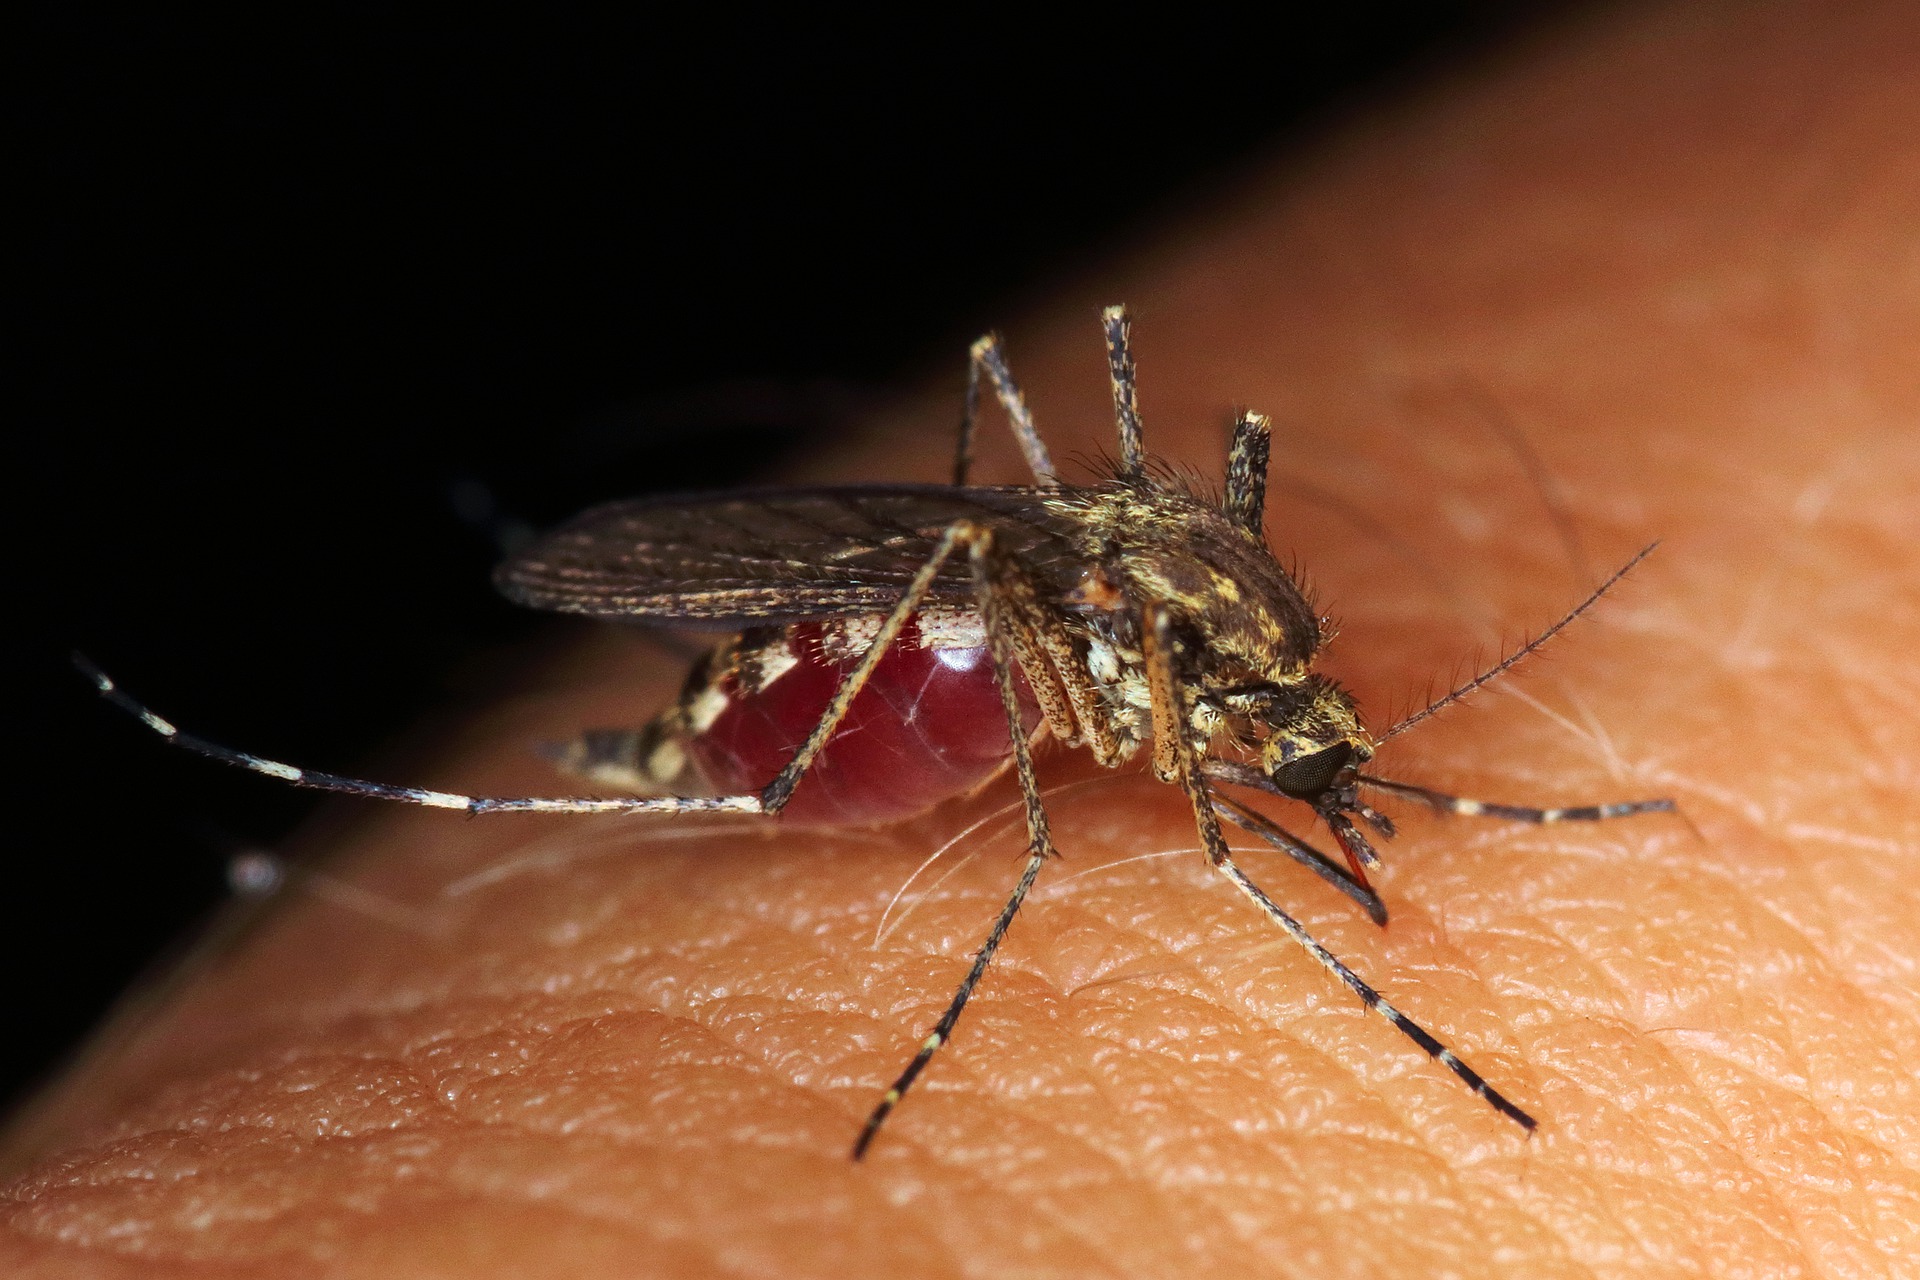 mosquito on human skin, while sucking blood